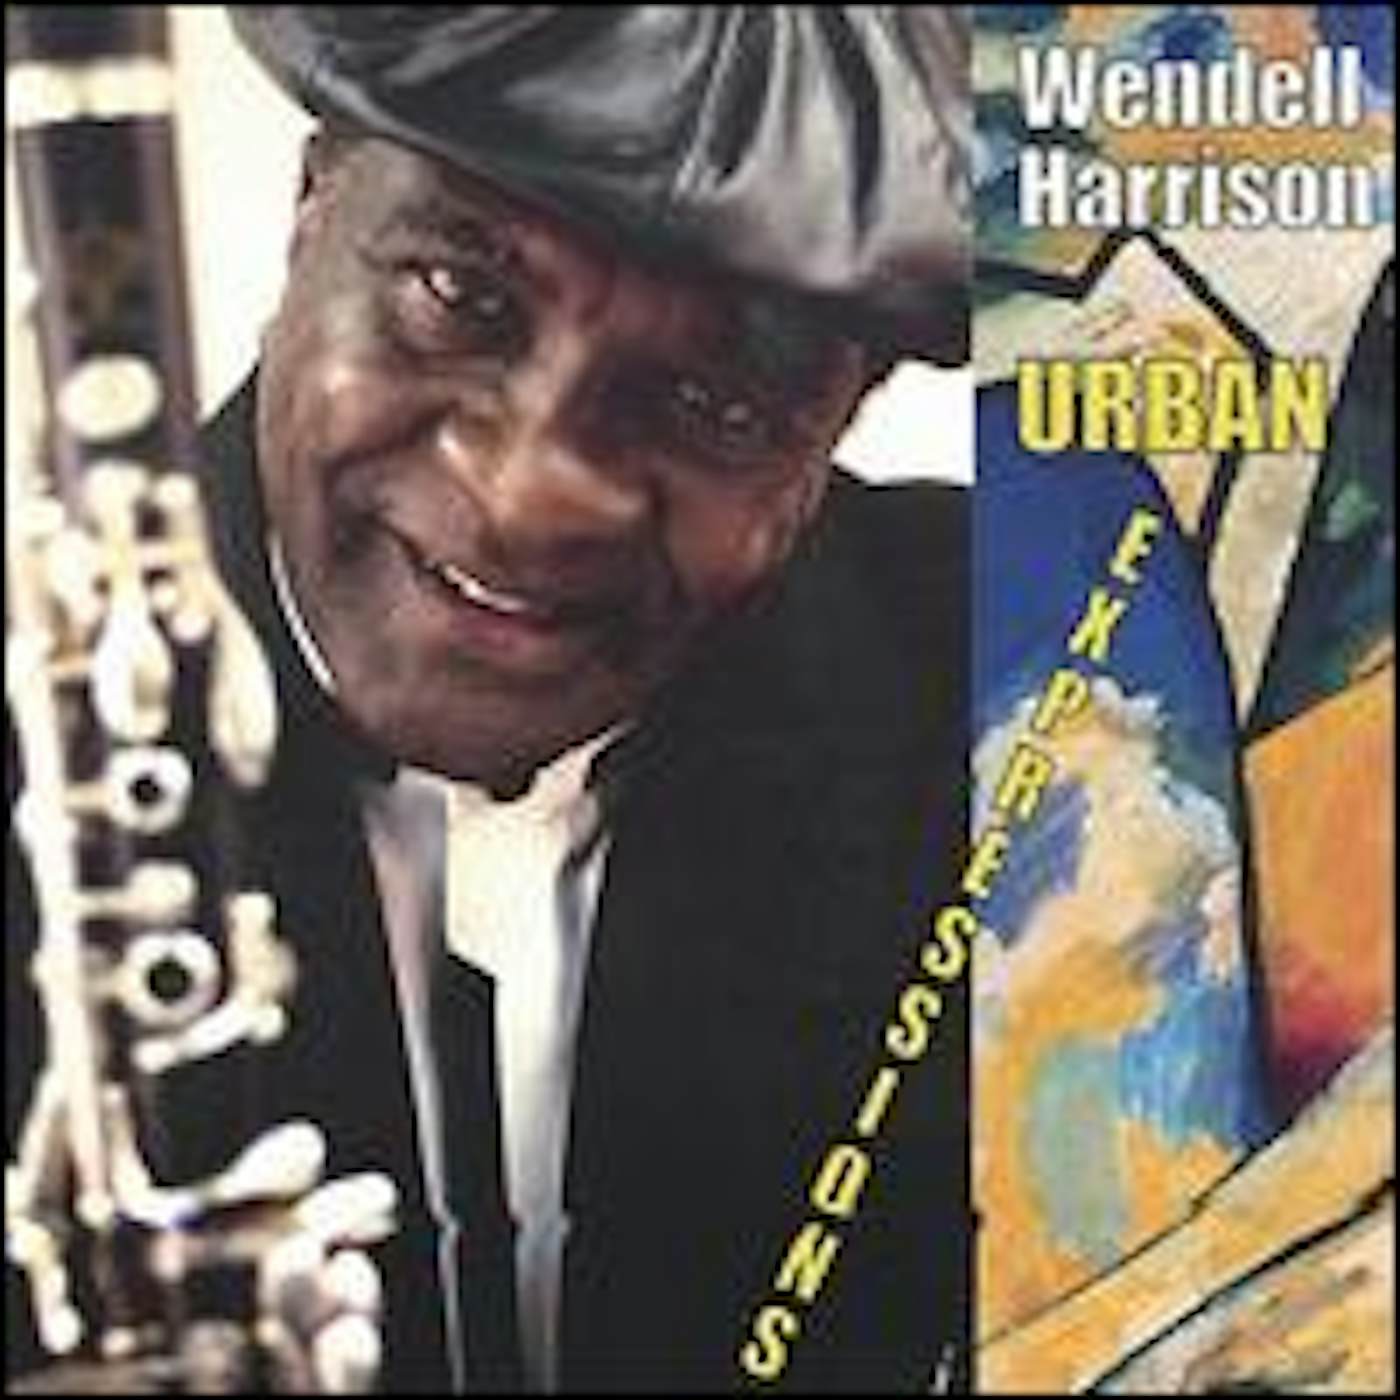 Wendell Harrison URBAN EXPRESSIONS CD